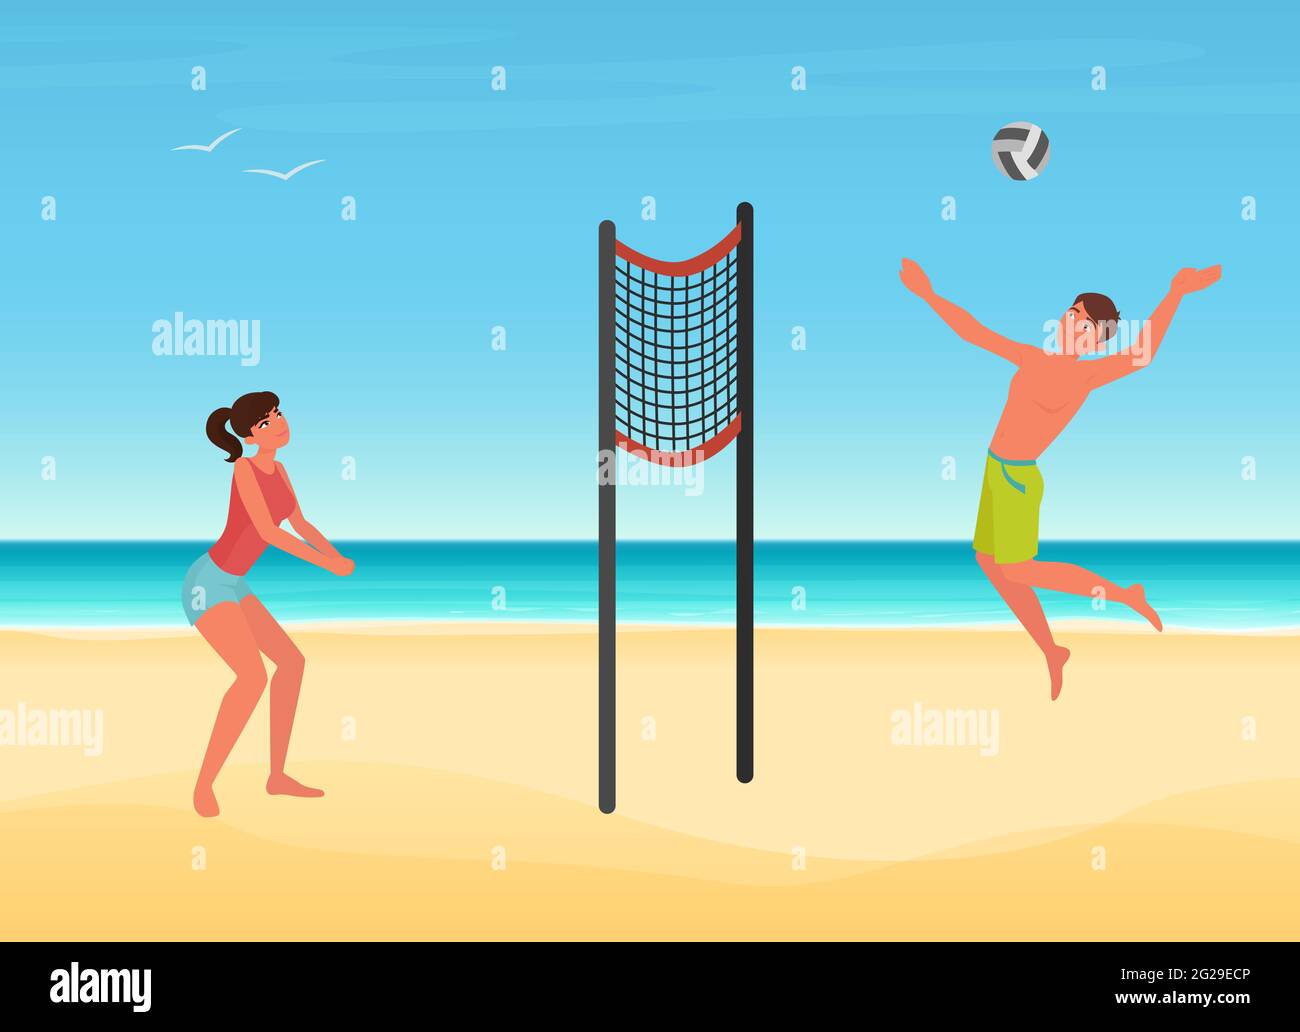 Couple people play volleyball on summer sea beach of tropical island vector illustration. Cartoon young woman man player character playing ball, jumping, summertime sport travel vacation background Stock Vector